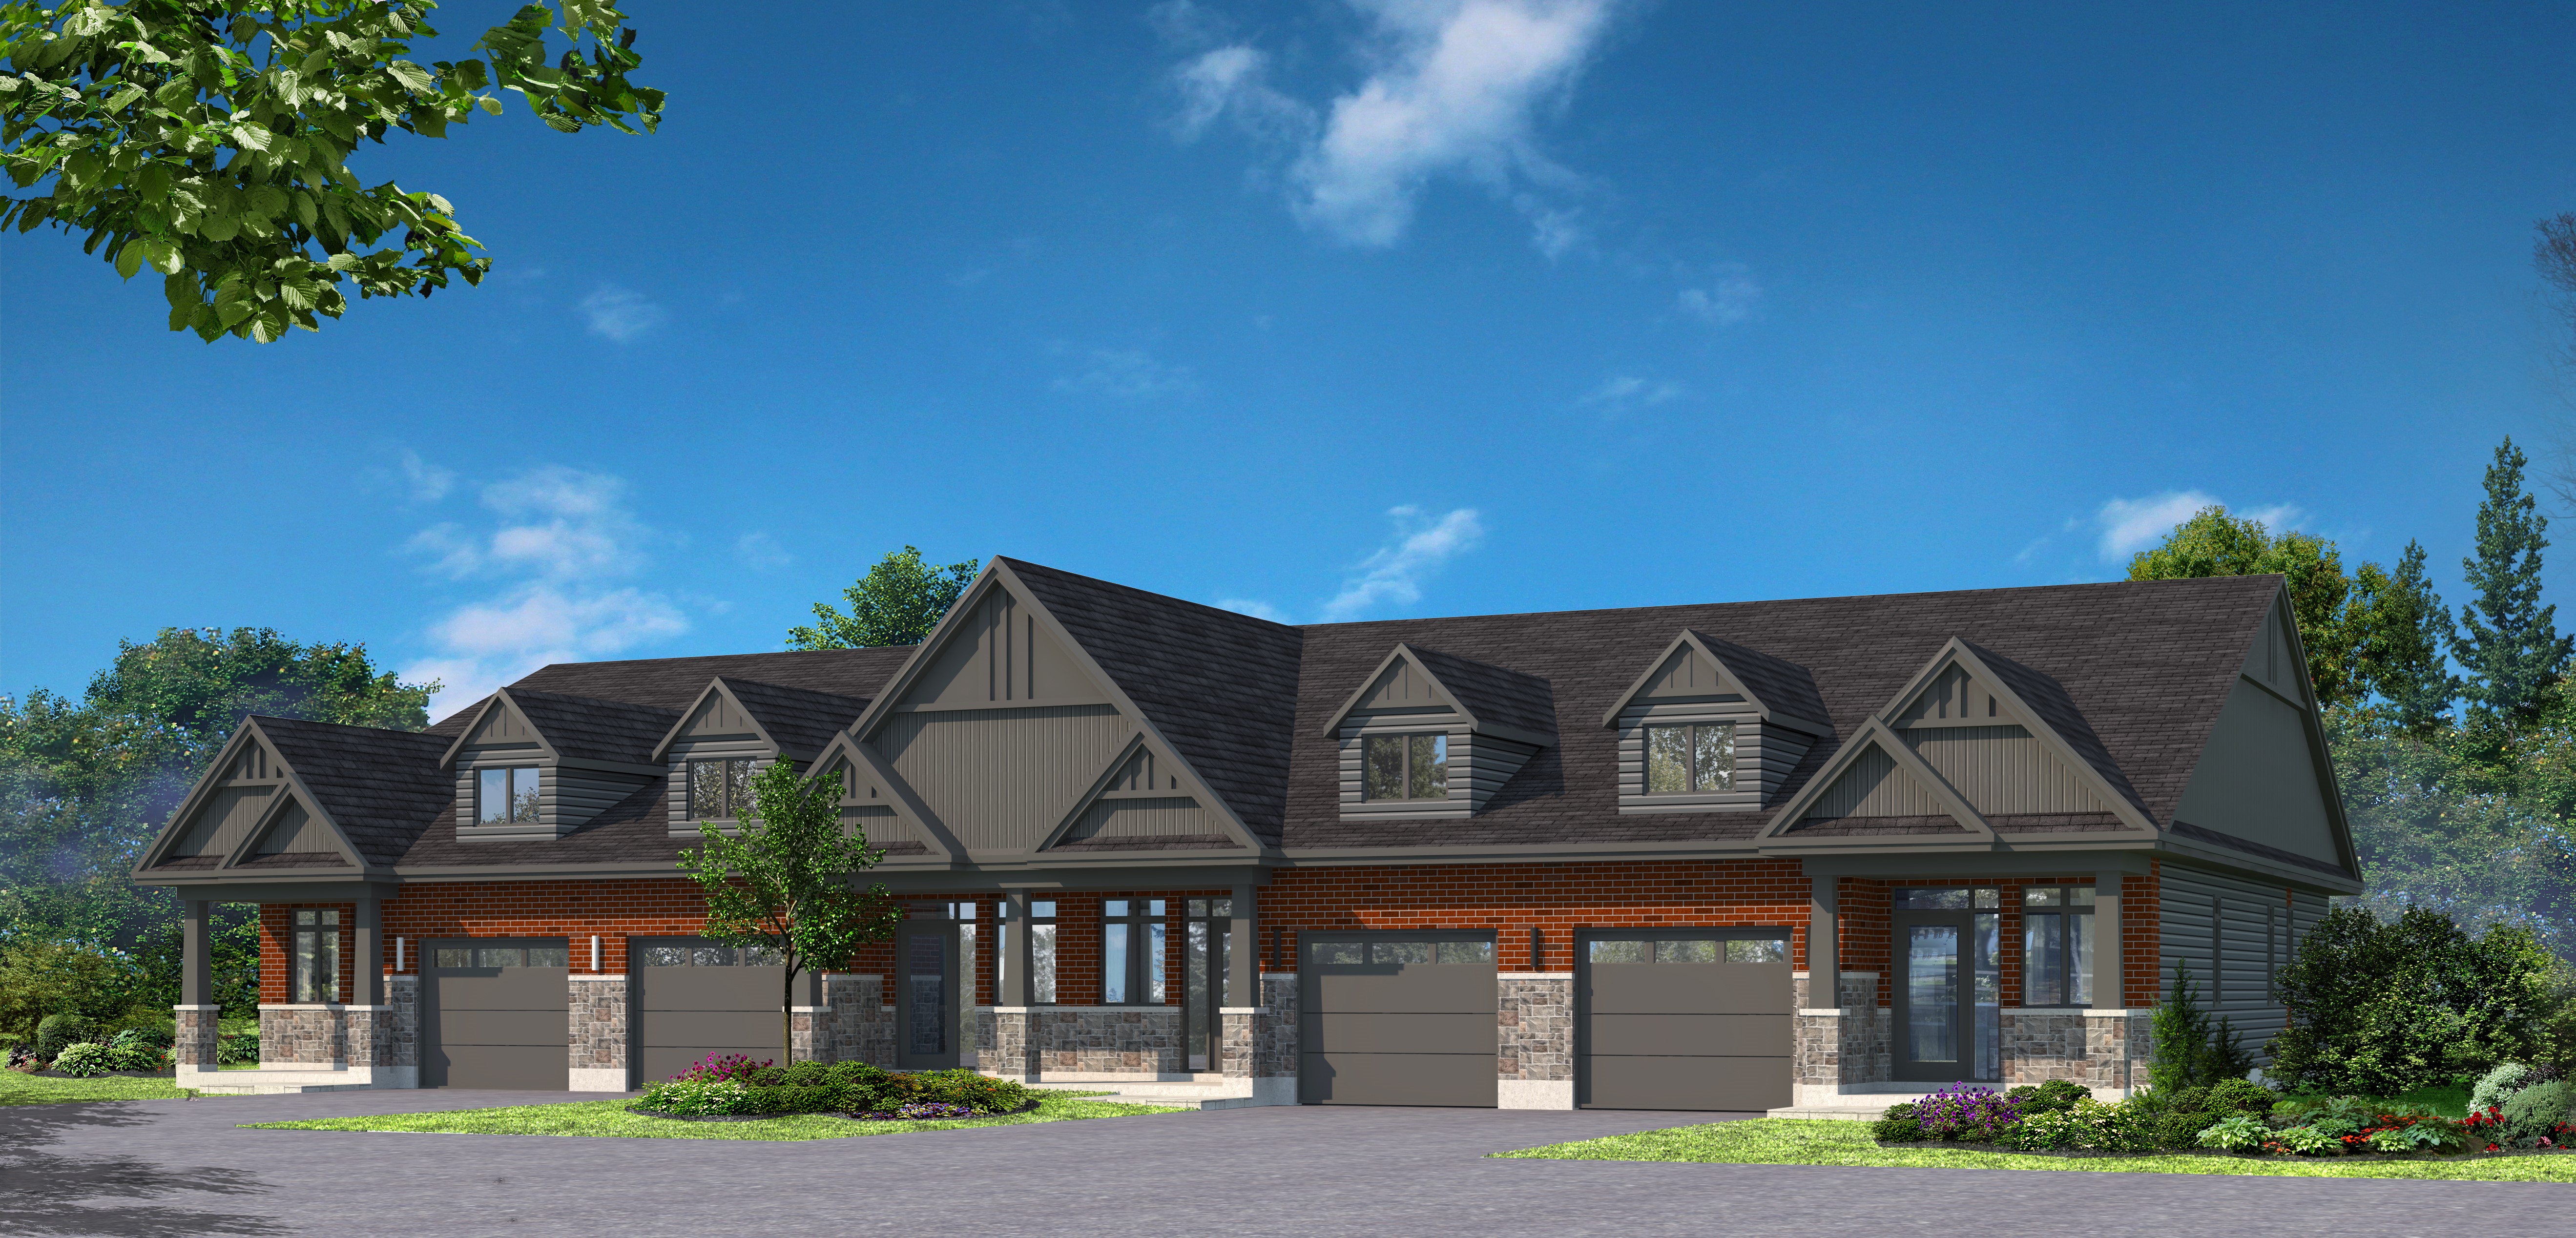 Orchard View by the Mississippi Town Home Rendering. 4 units attached